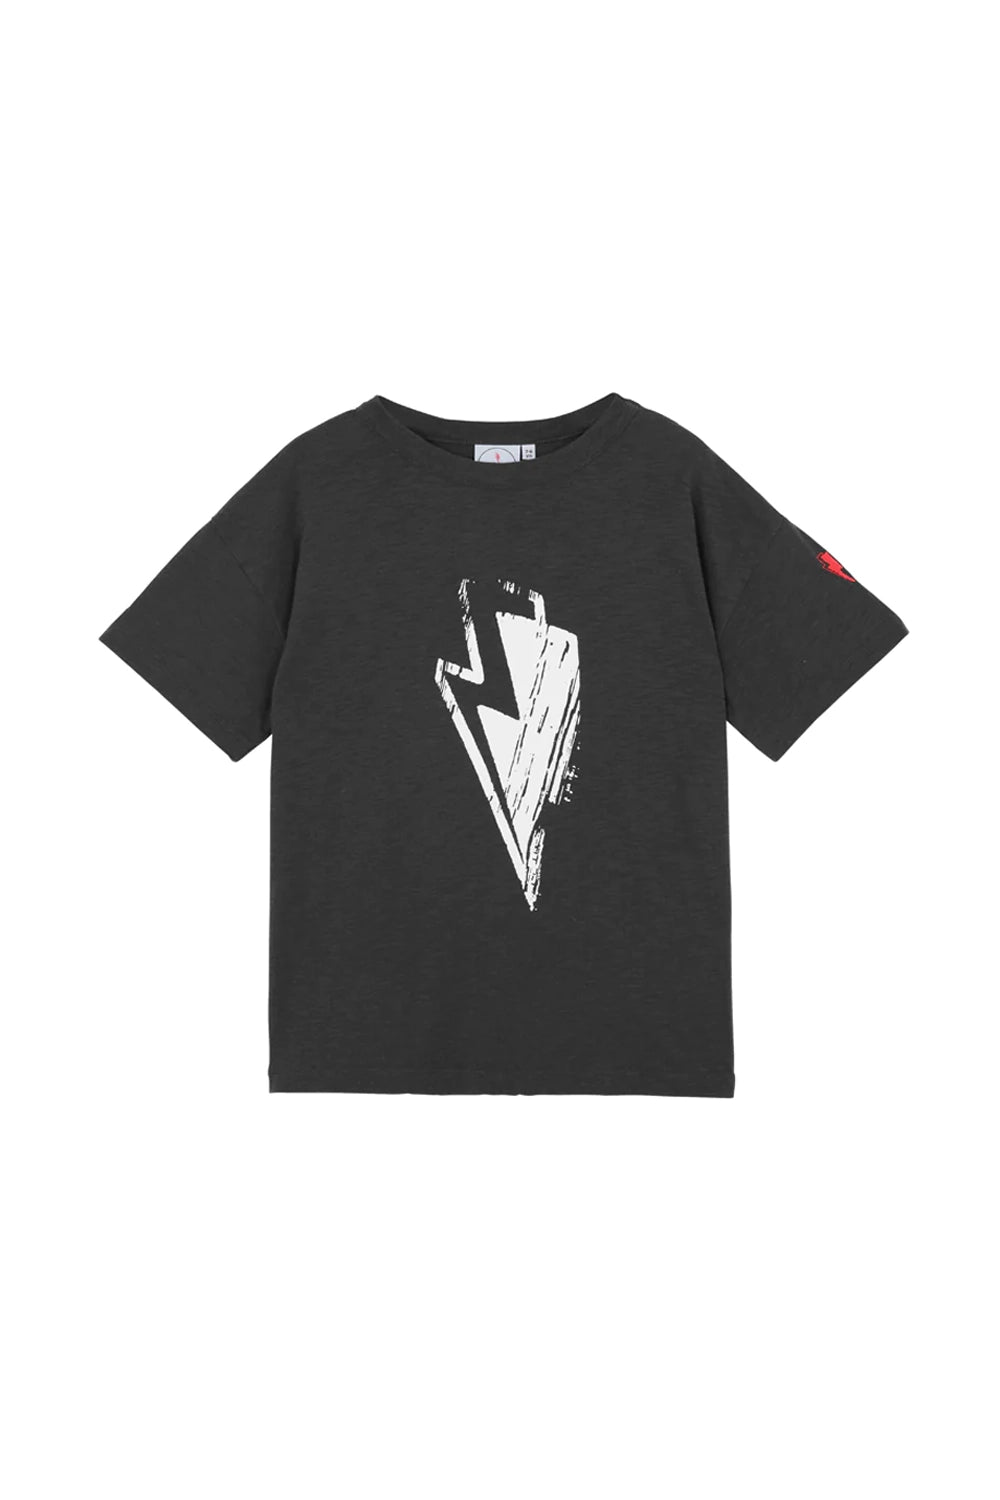 Kids Slate Grey with Bolt Logo T-Shirt Scamp & Dude